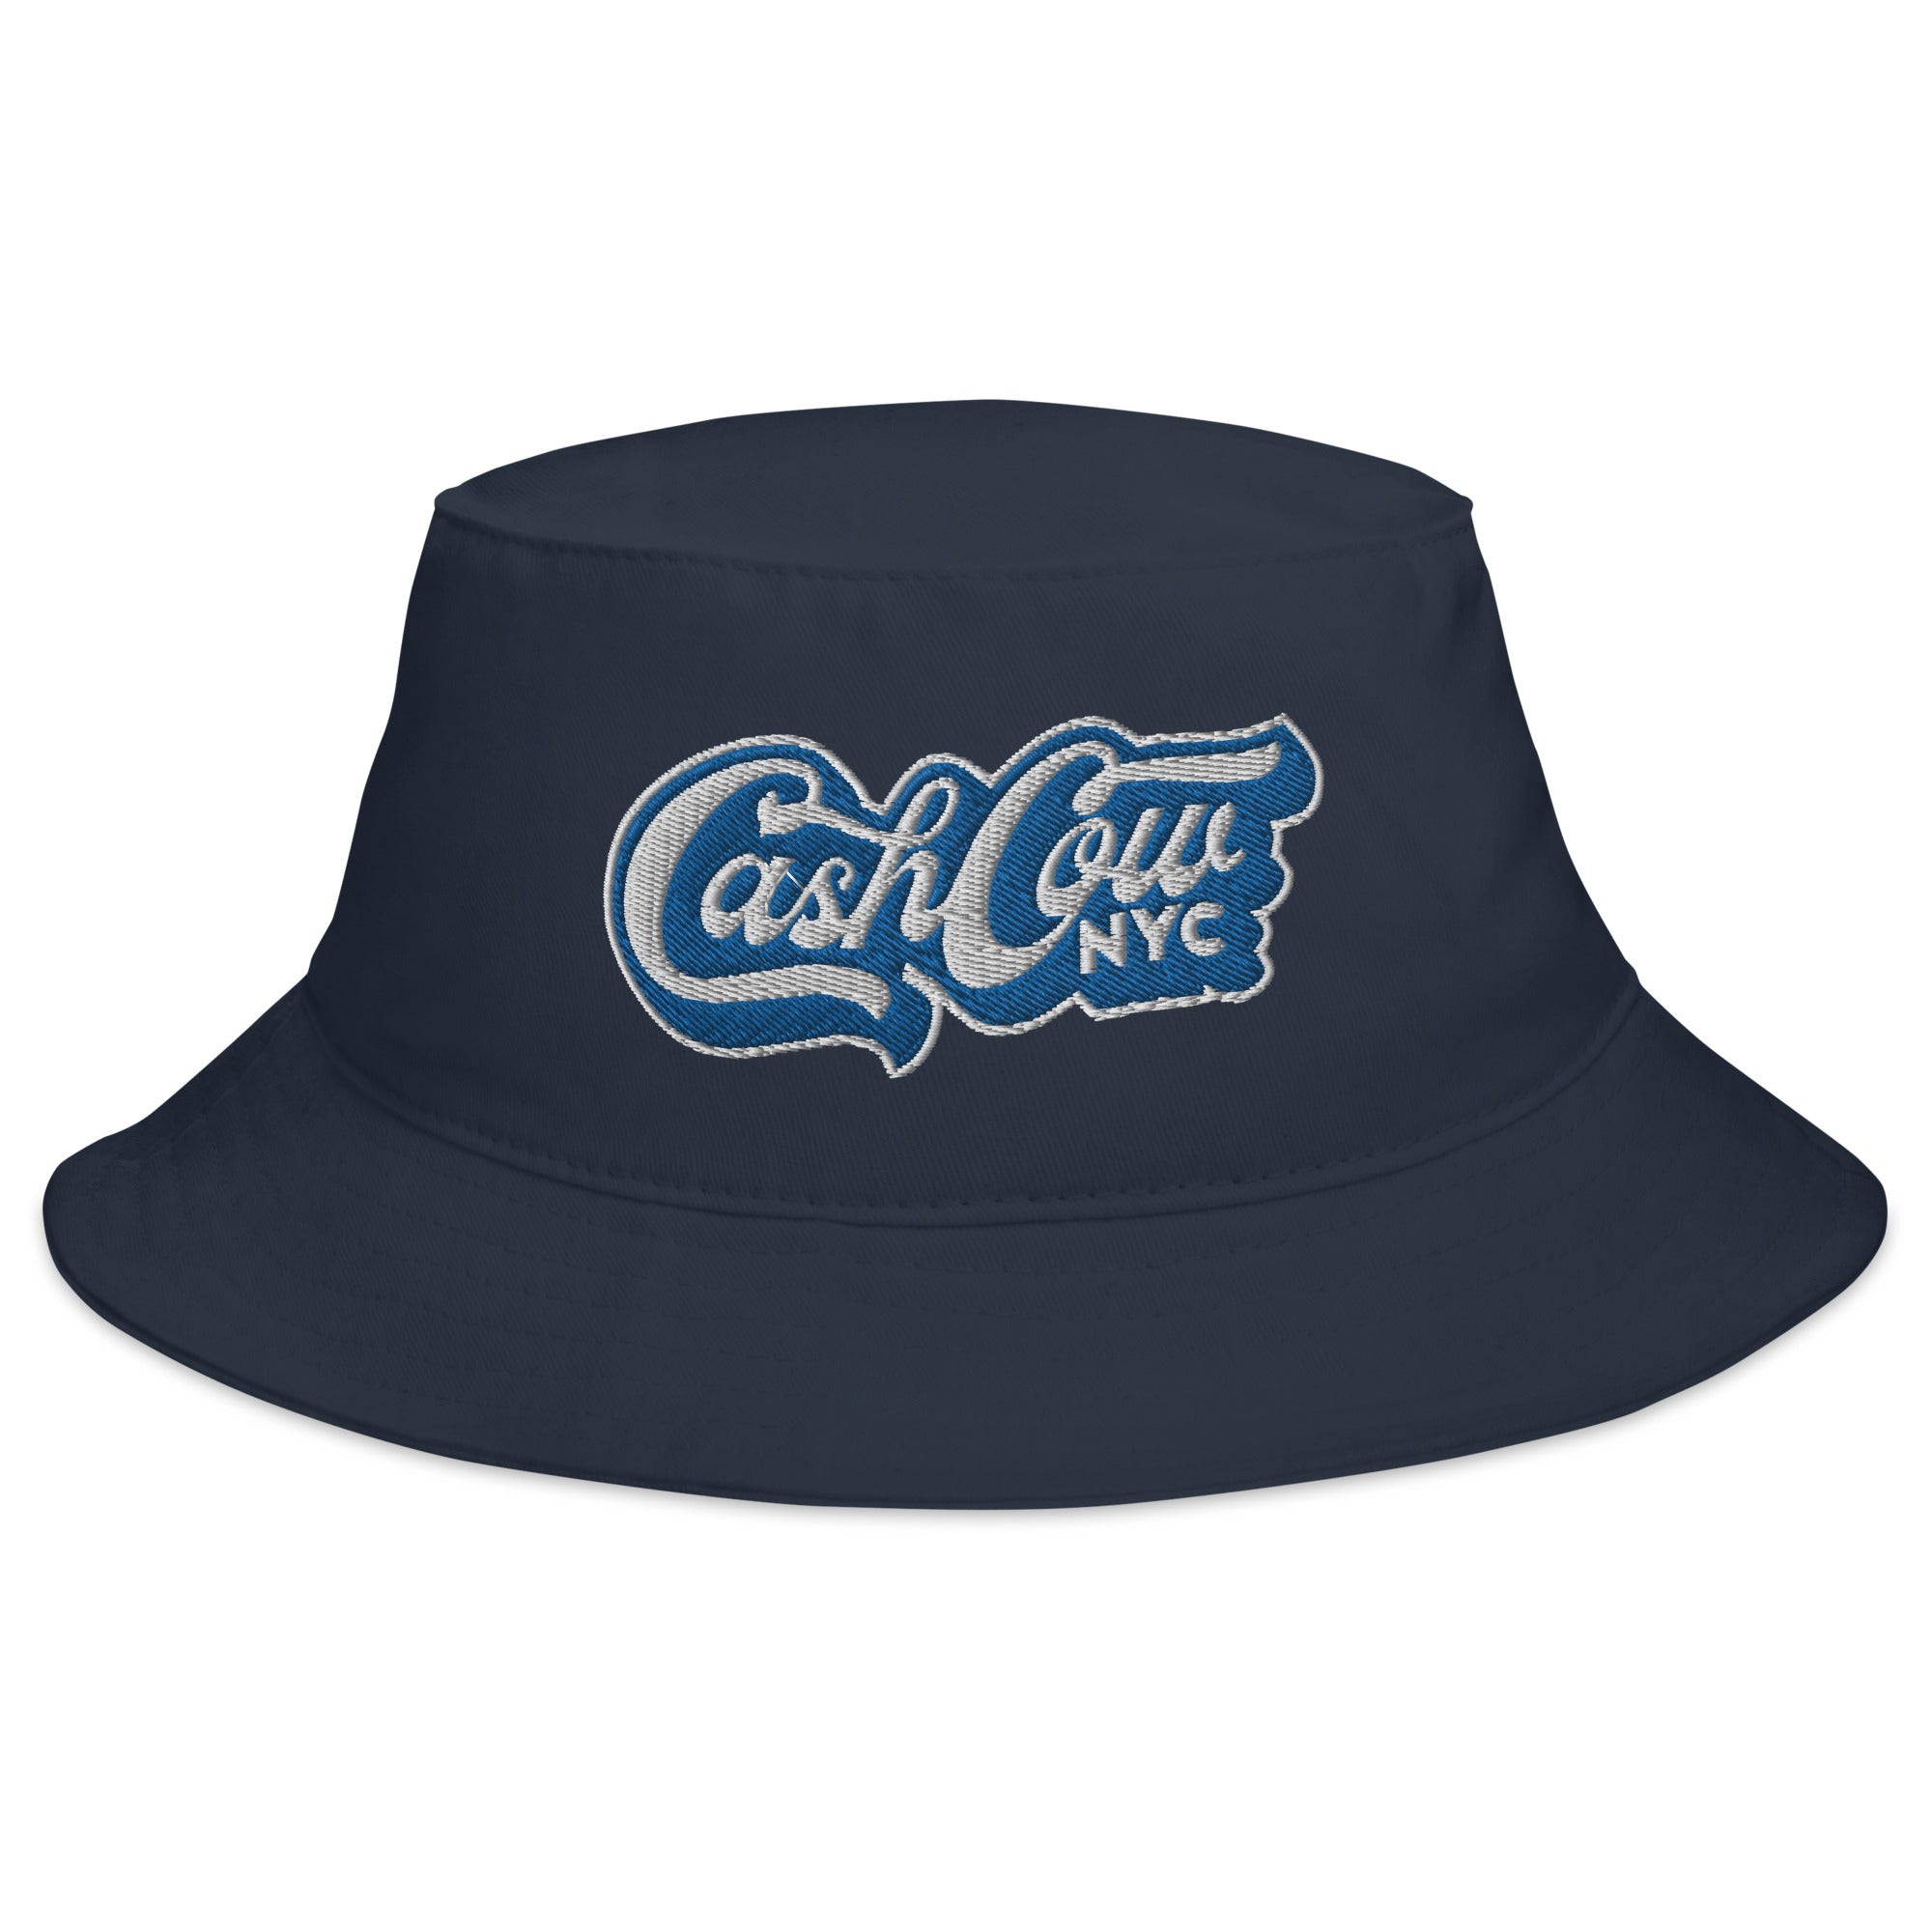 Intuition Recept Creed Cash Cow NYC - Navy Bucket Hat | Cash Cow NYC